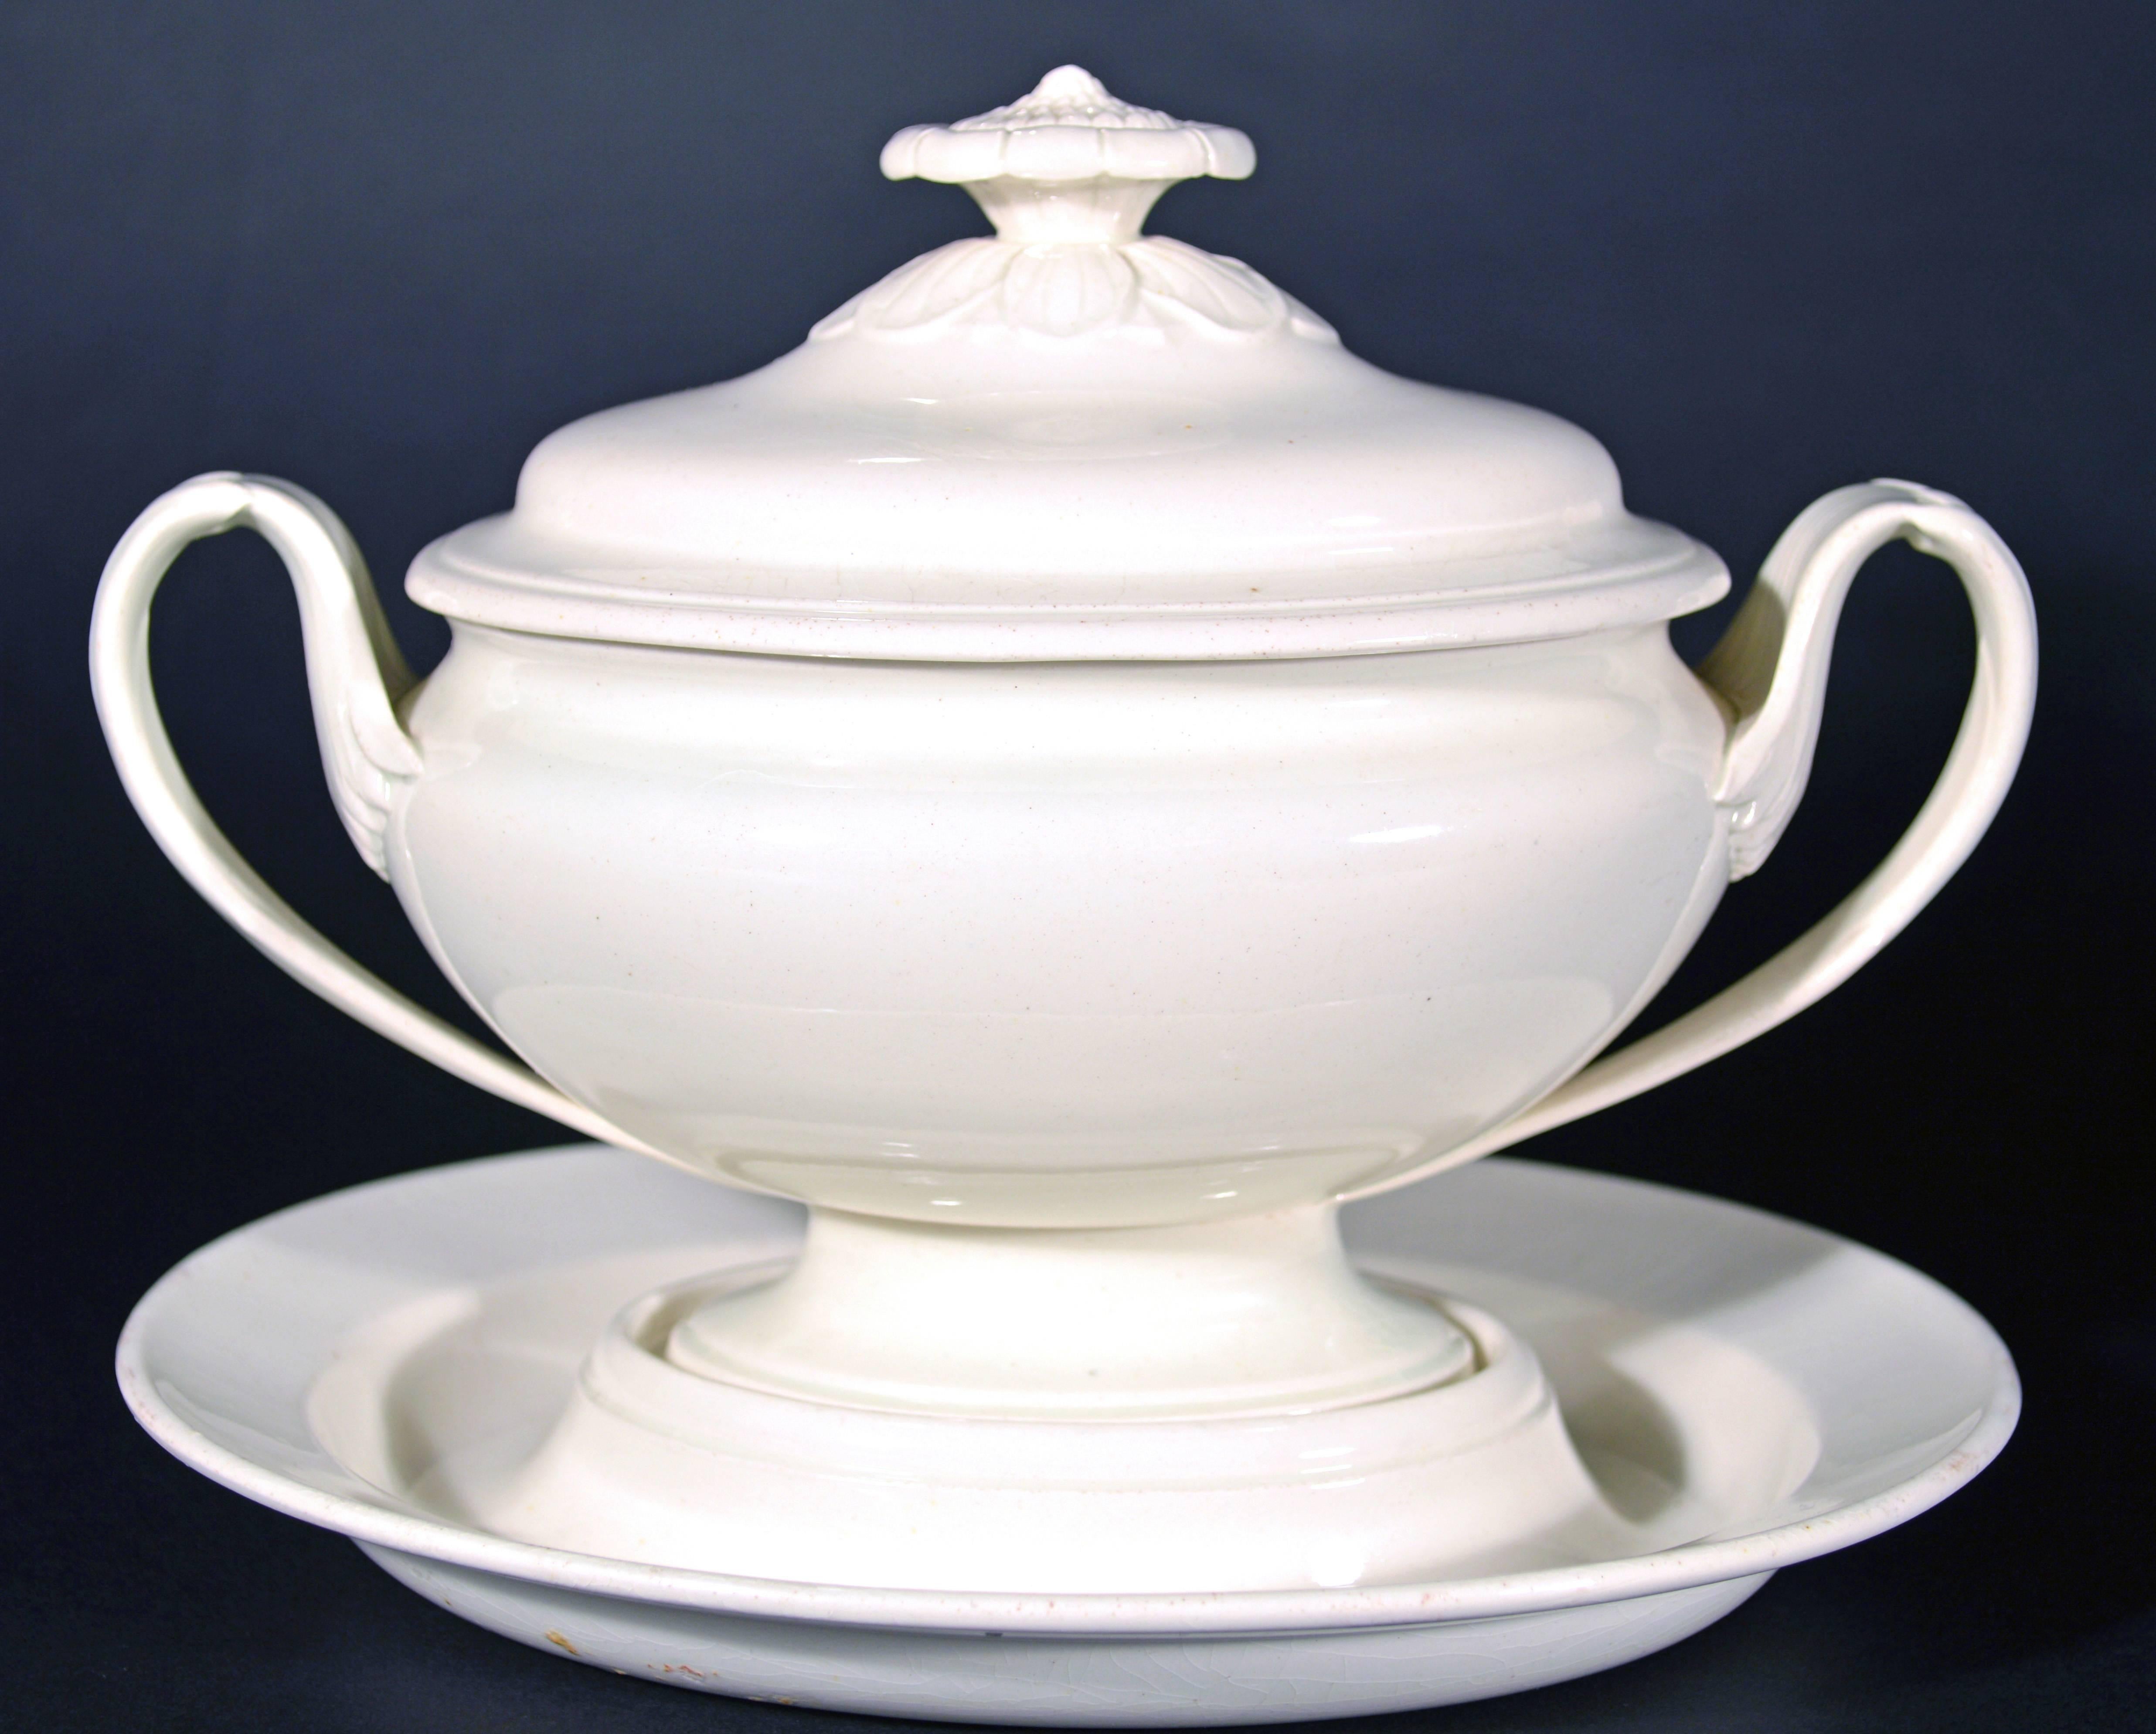 The Wedgwood creamware sauce tureen is an elegant and neoclassical footed oval tureen with slotted stand and cover. The finial is in the shape of a flower and the elongated looped handles feature a subtle botanical design.

Dimensions: 
Stand: 1